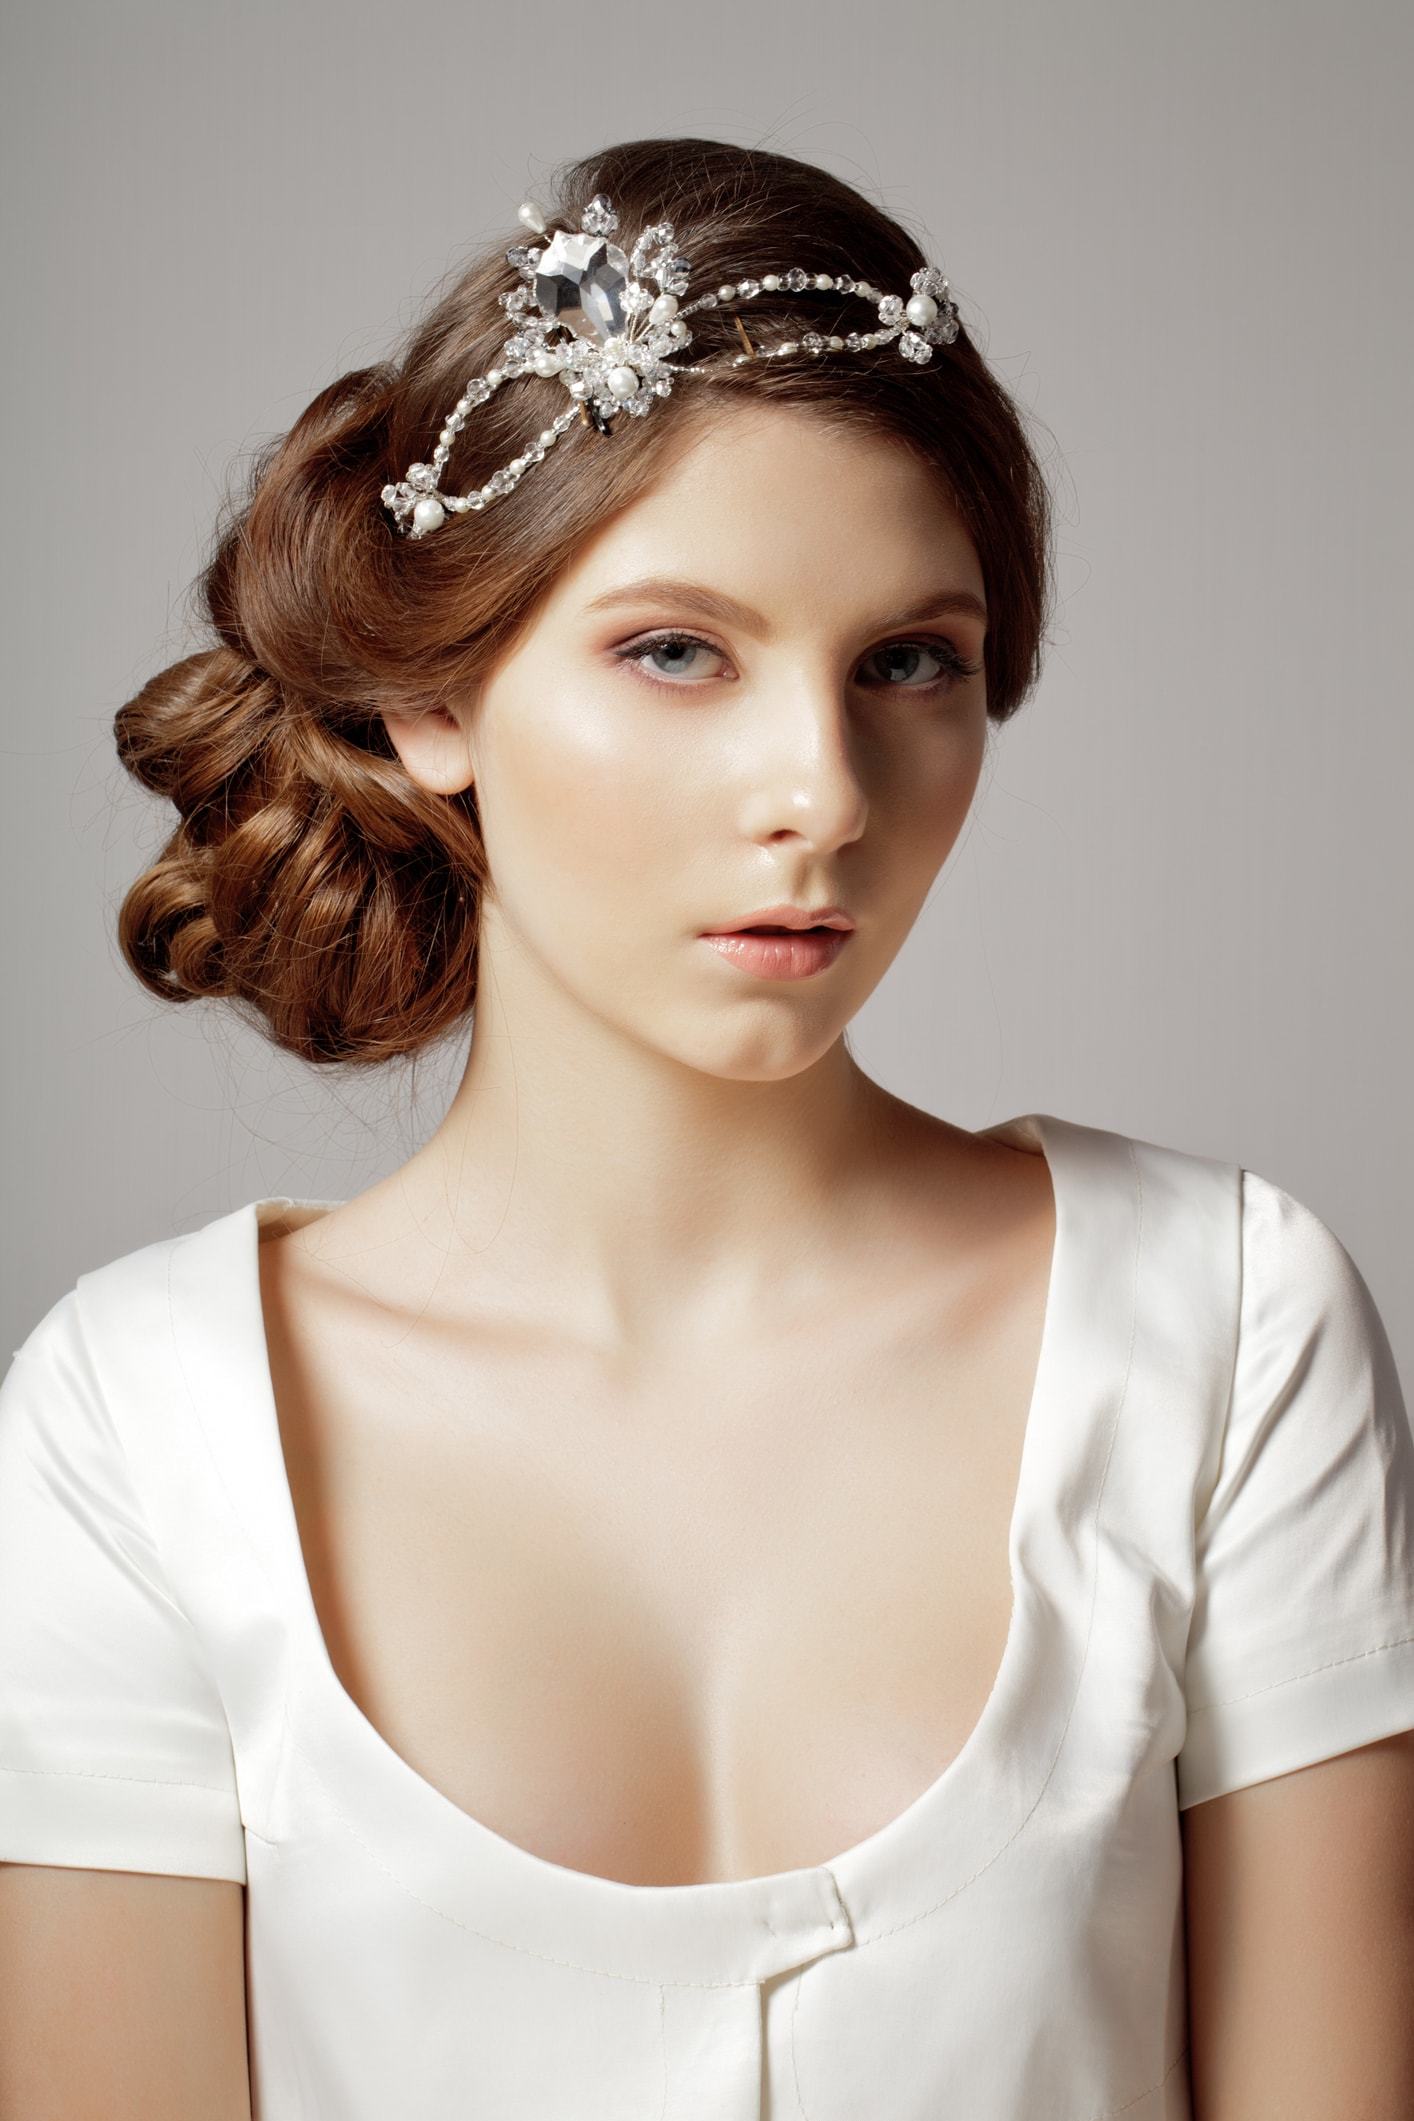 Get the wedding hairstyles other brides are asking for in 2021/22